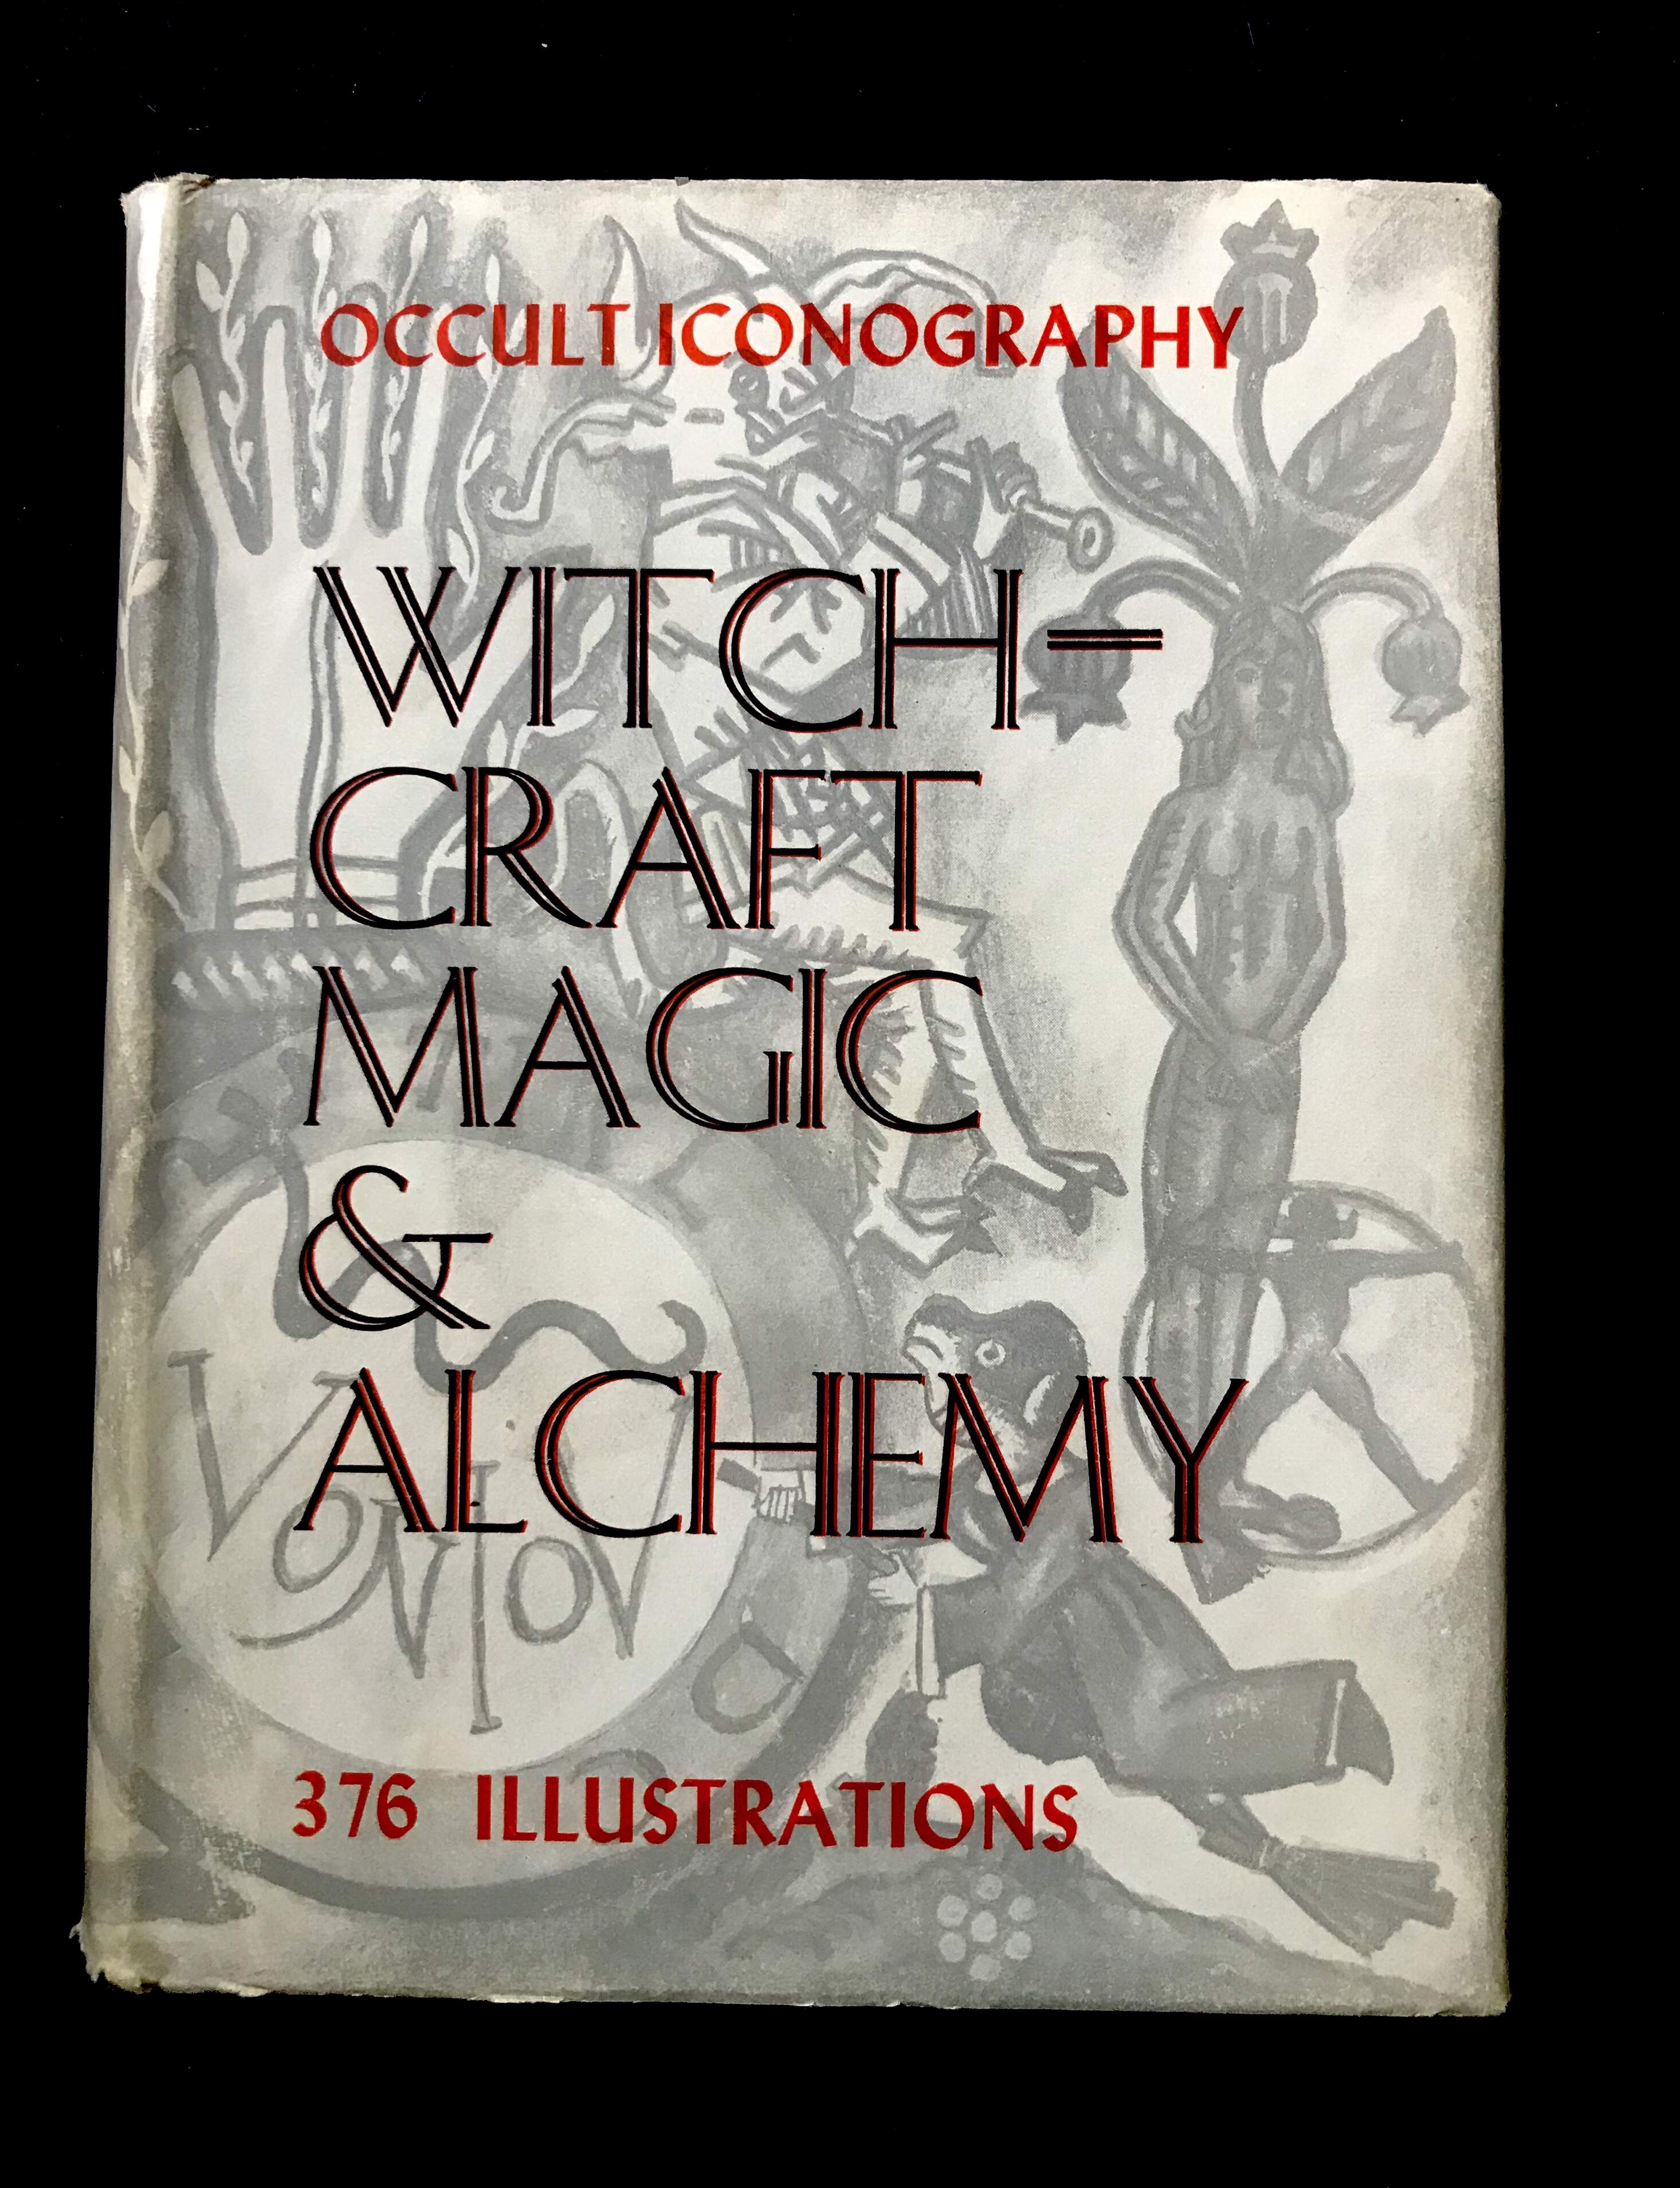 Occult Iconography: Witchcraft, Magic & Alchemy by Grillot De Givry